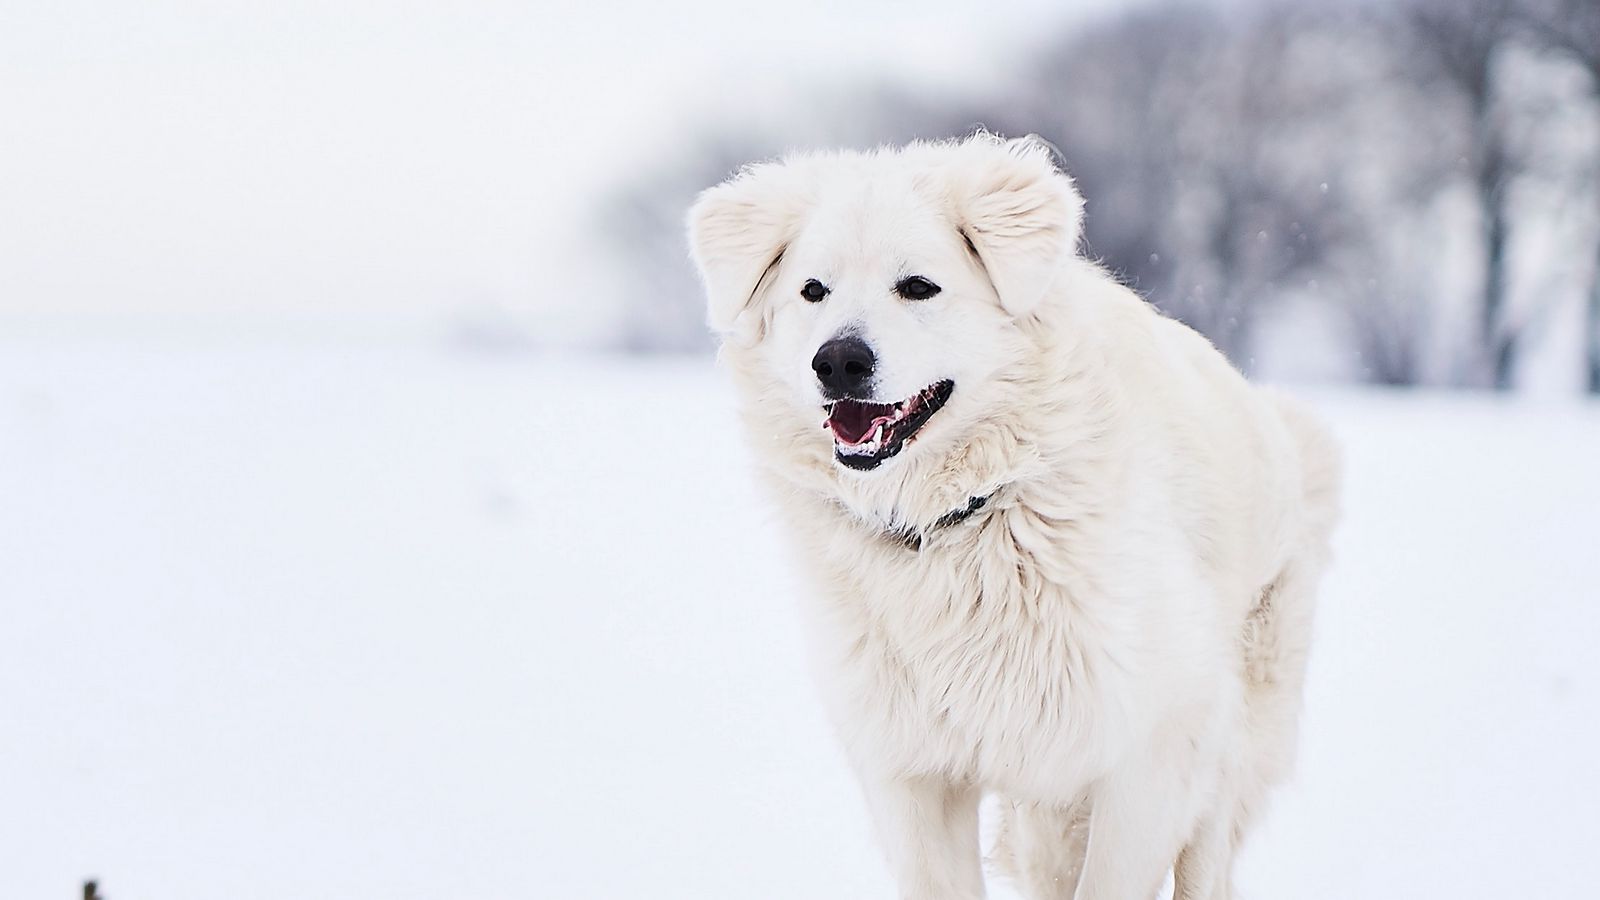 Download wallpaper 1600x900 great pyrenees, pyrenean mountain dog, dog, white, snow, running widescreen 16:9 HD background